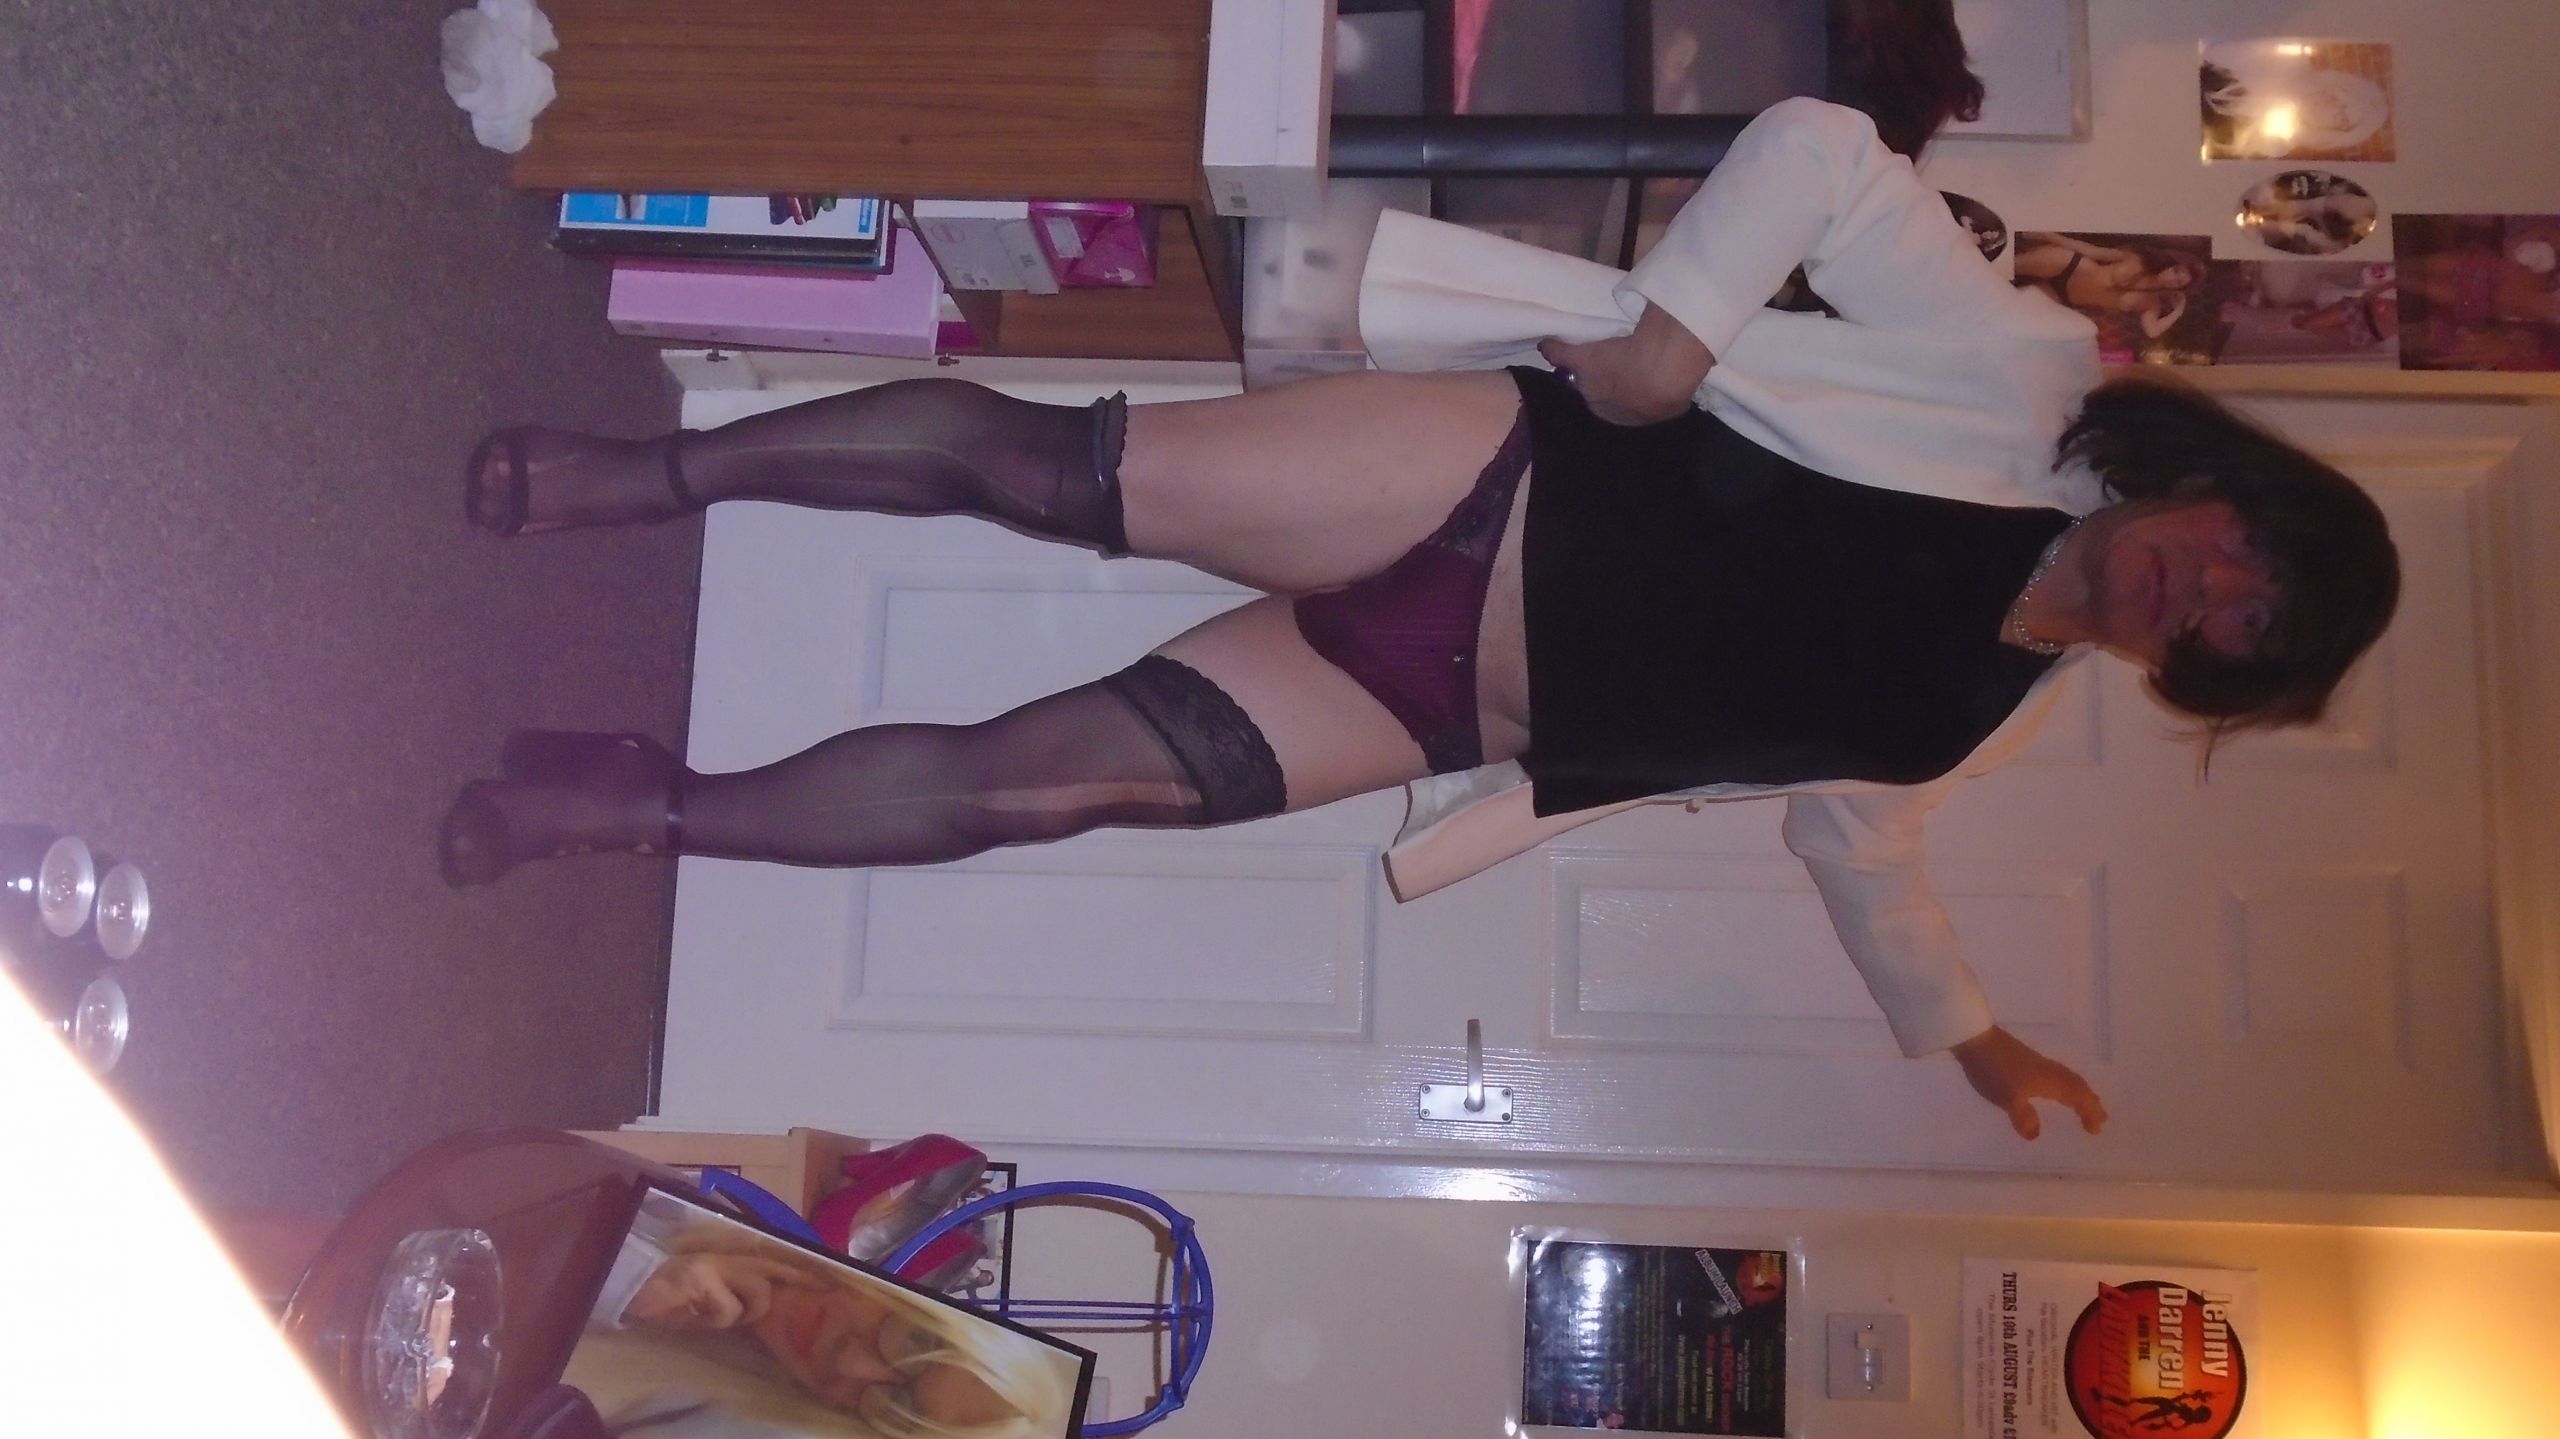 Deena Black dress with whitejacket (11)in knickers SEXY Pose